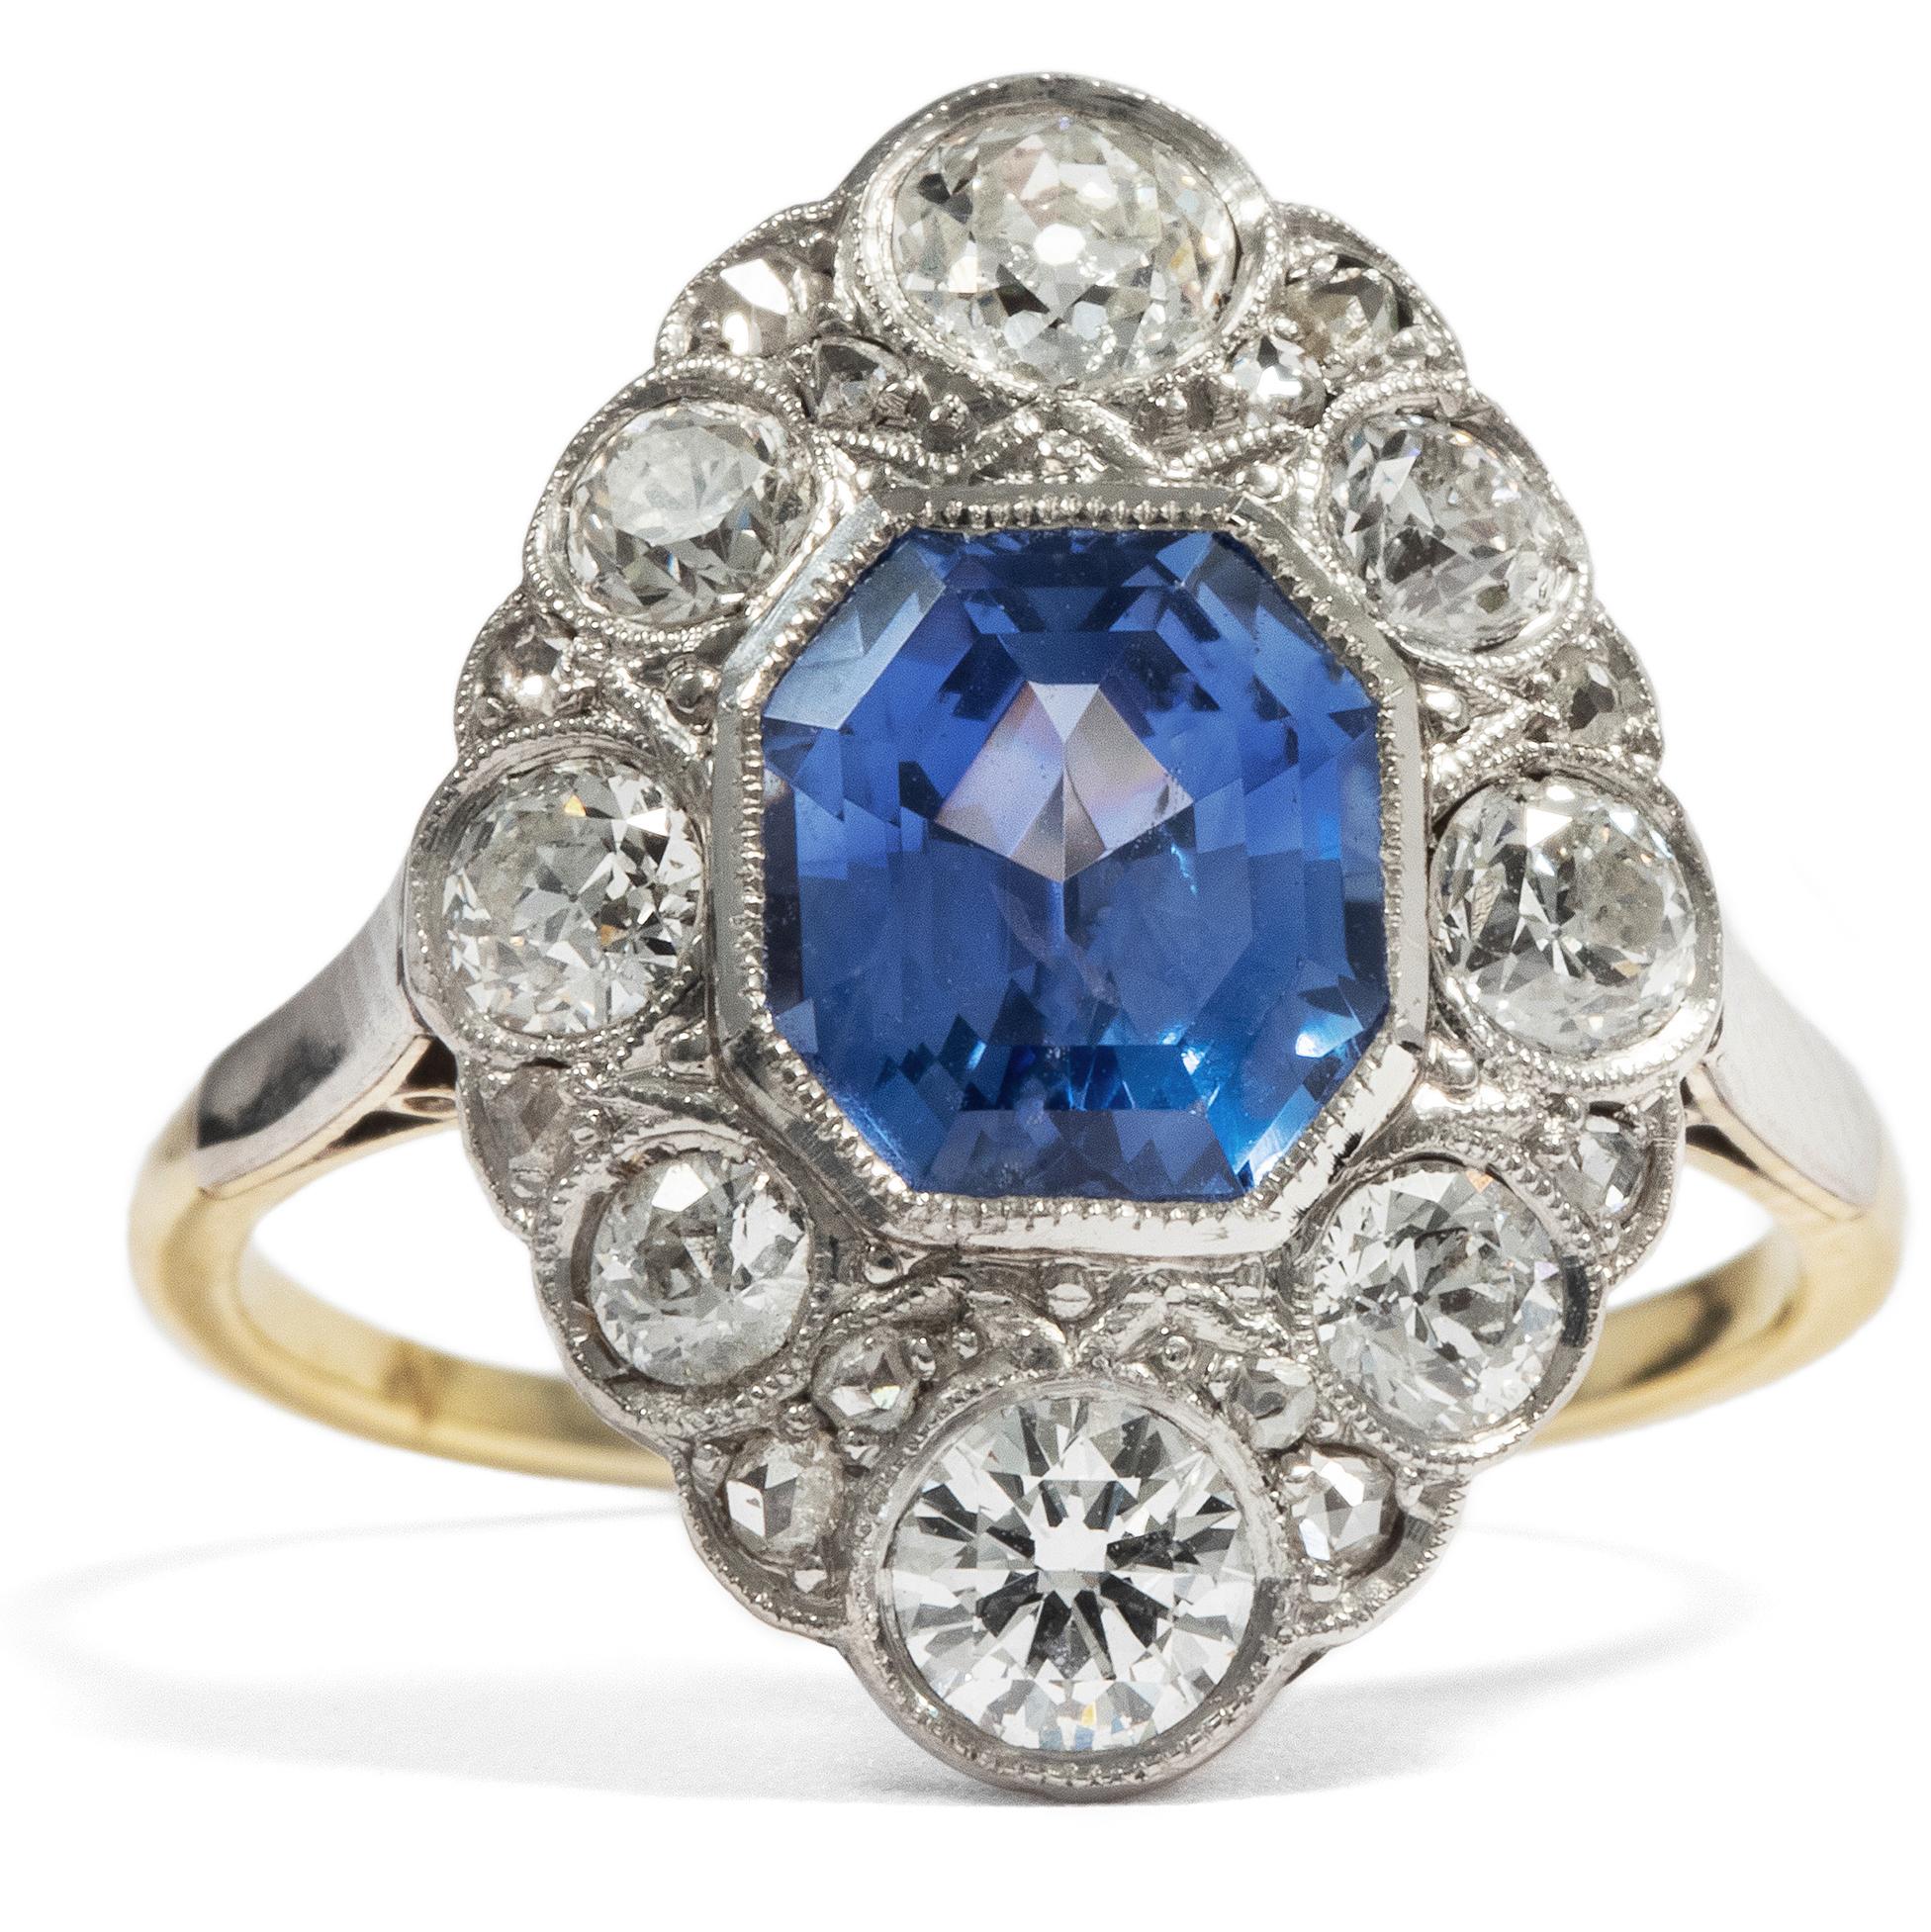 The combination of sapphire and diamond has long been one to hold romantic connotations: especially in 19th century gemlore, the sapphire has represented fidelity, whilst the diamond, due to its great hardness, has been associated with eternity.